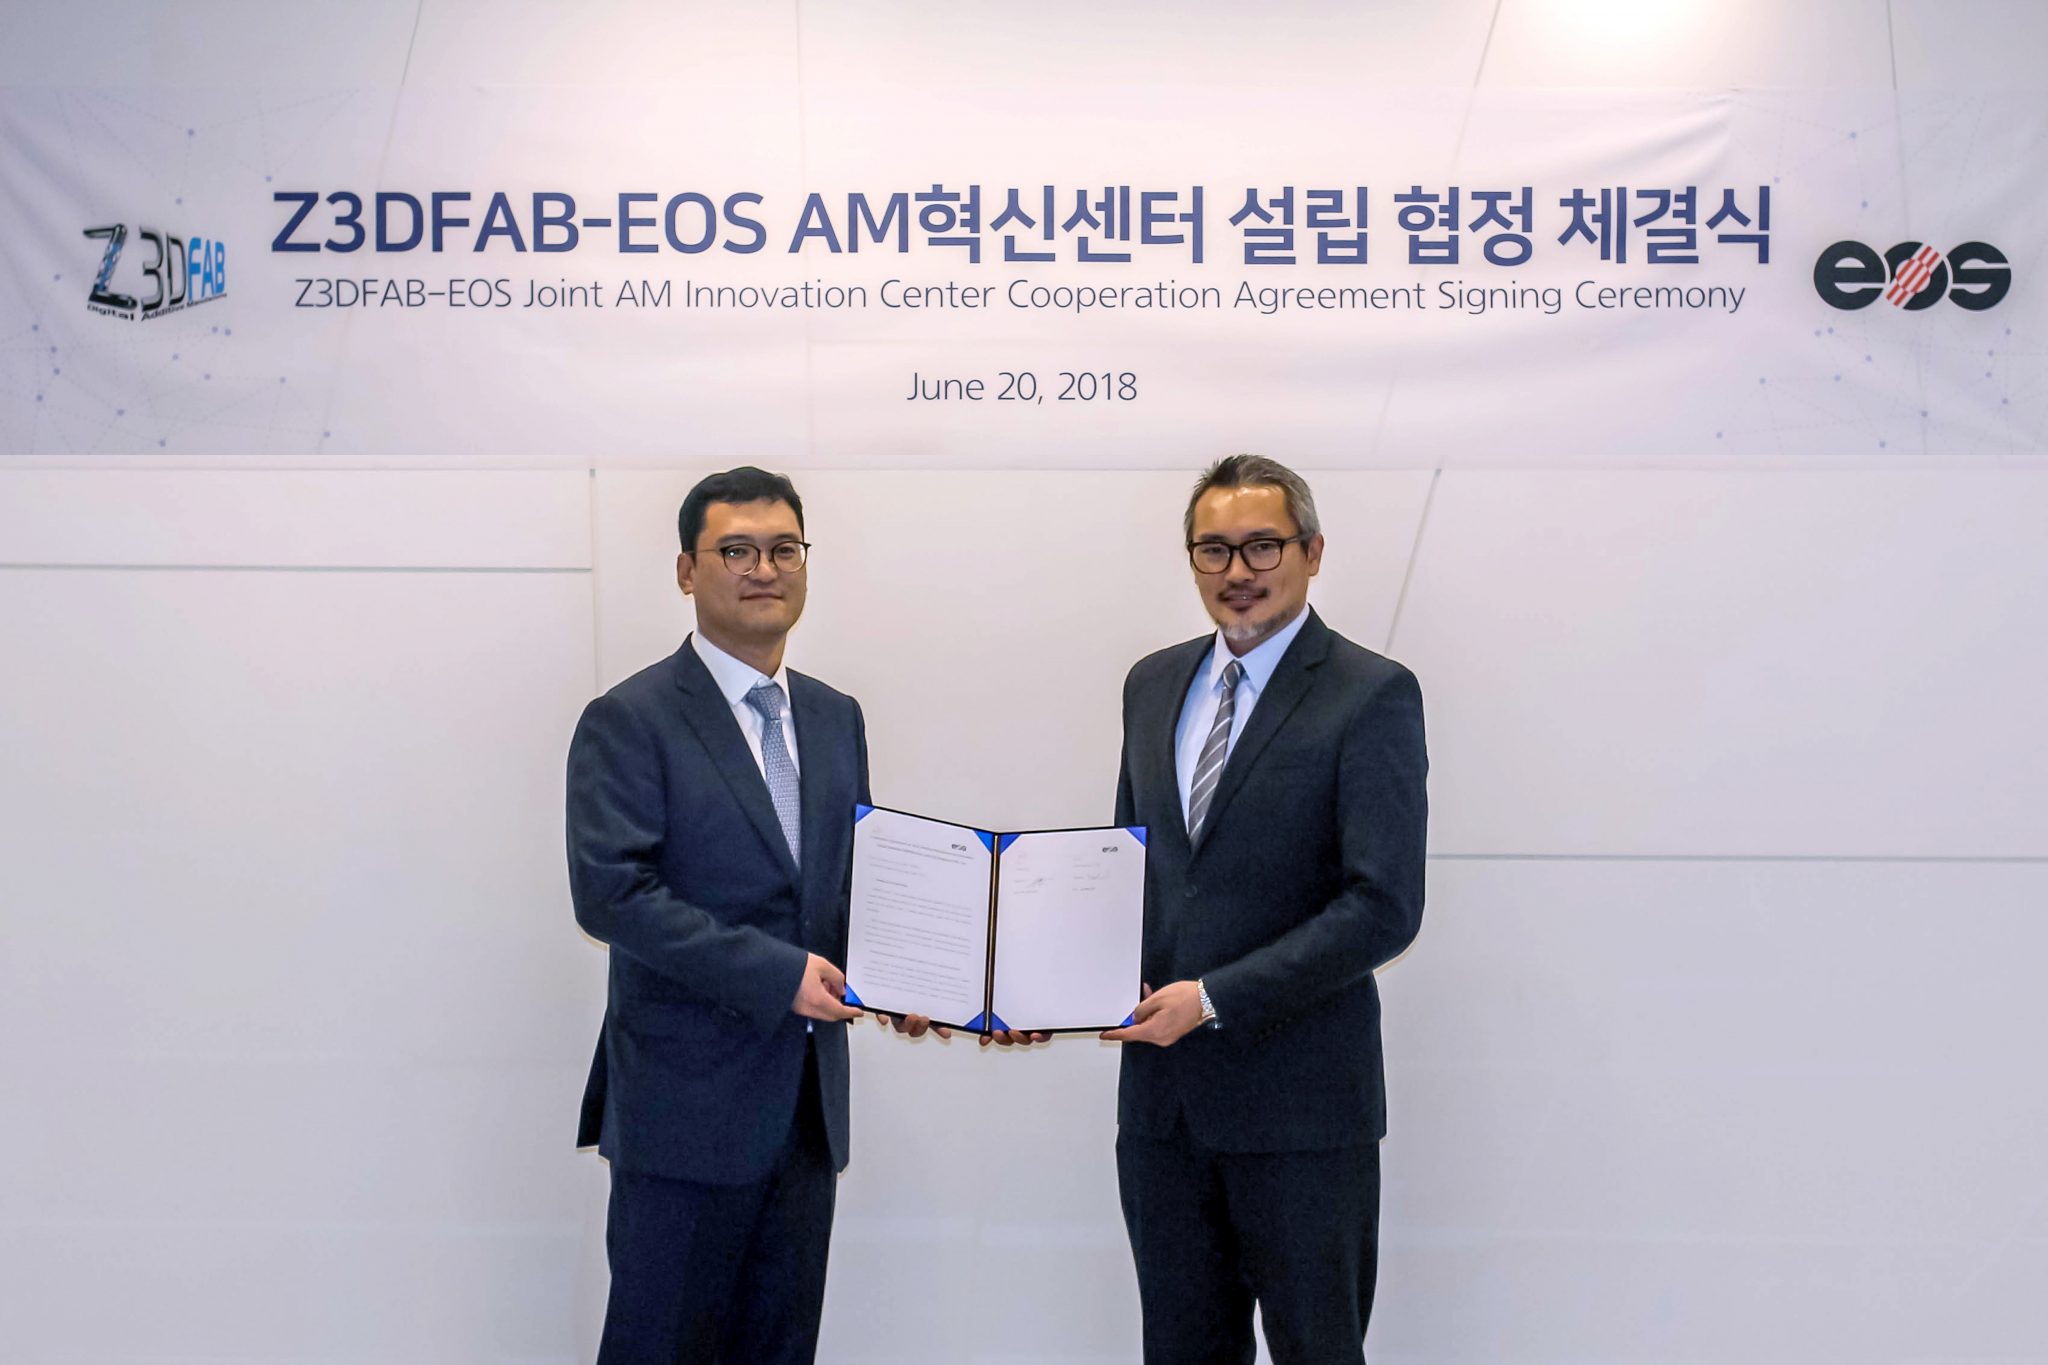 Z3DFAB and EOS have signed an agreement for a 3D Printing Innovation Center. Photo via Z3DFAB.